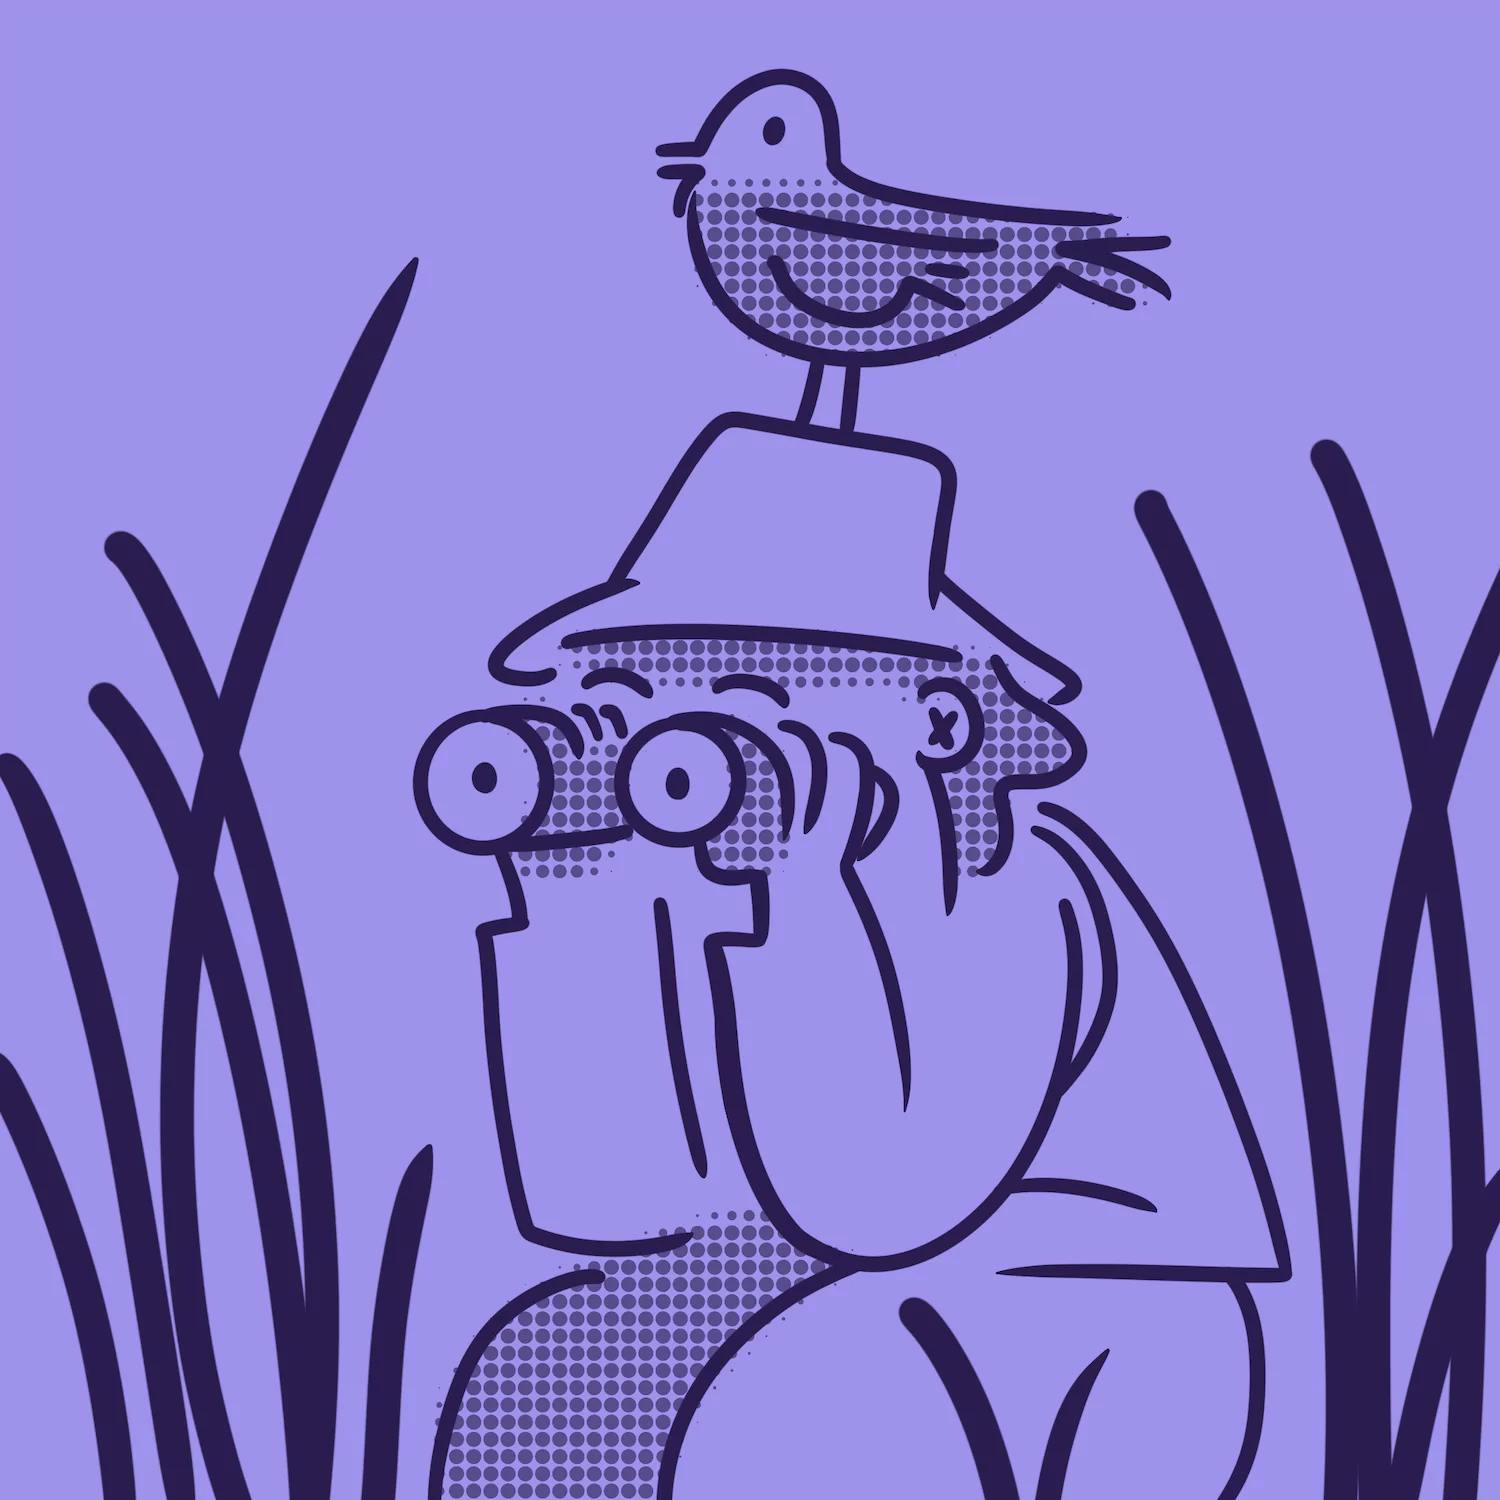 A man looking through binoculars sitting in a field of large grass. There's a bird perched on top of his head.